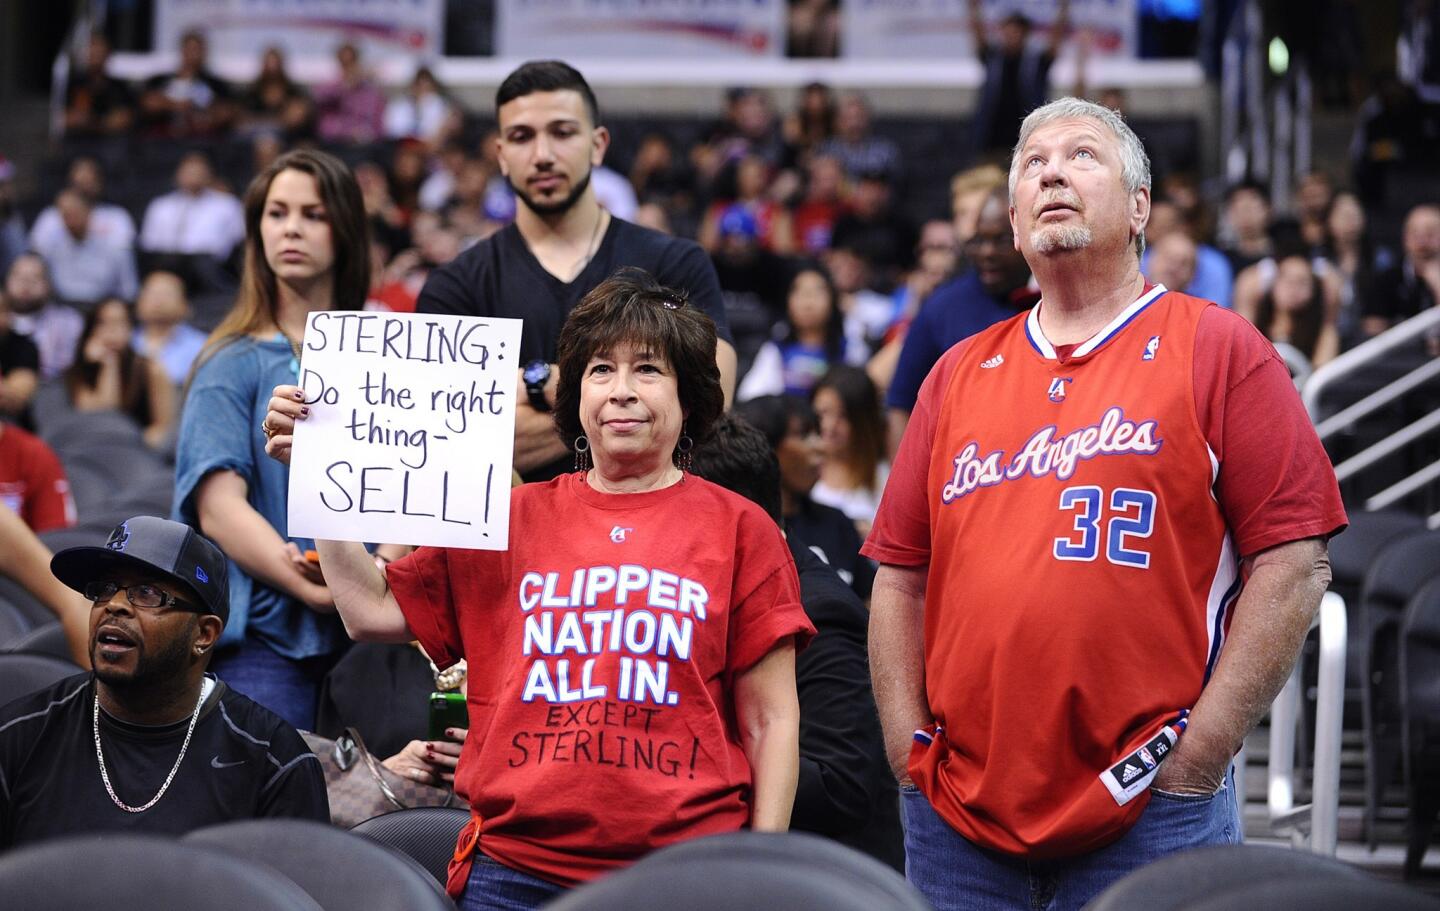 Clippers fans